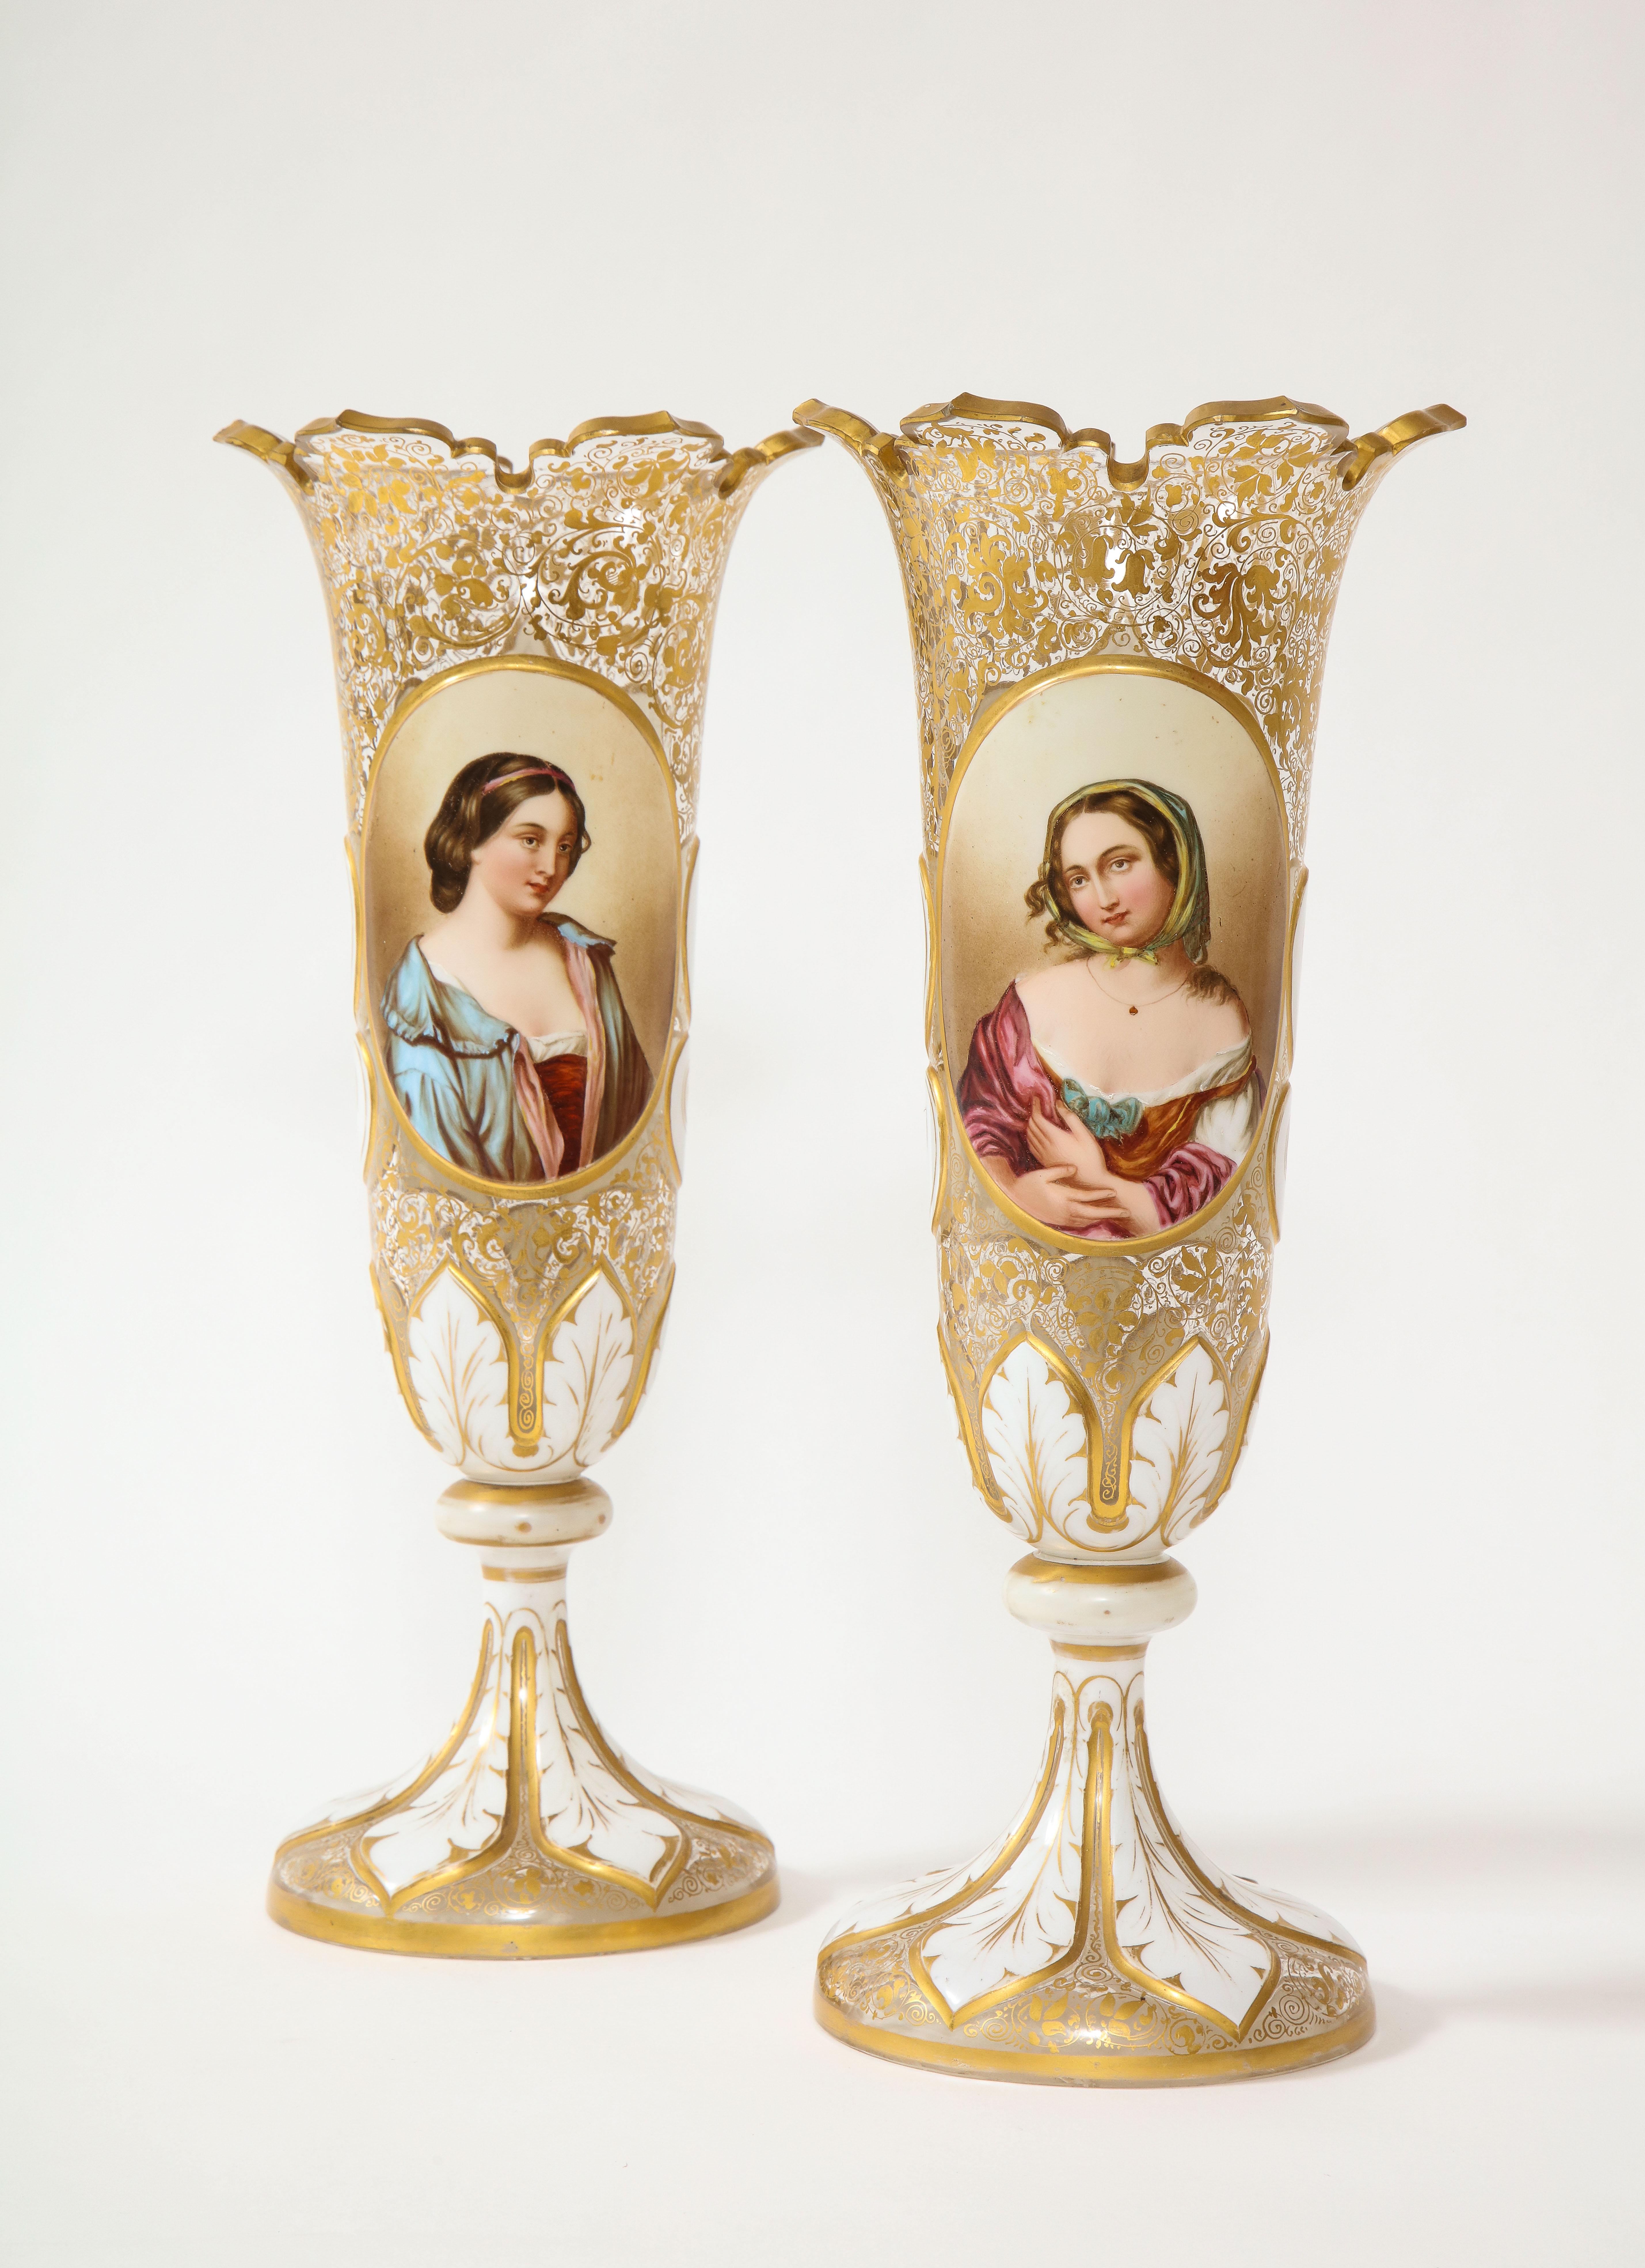 A pair of 19th century Louis XVI style Bohemian white over clear crystal maiden portrait vases with hand-painted gilt décor. Each is beautifully hand-painted with gorgeous maidens looking at one another. Each maiden is beautifully hand-painted with